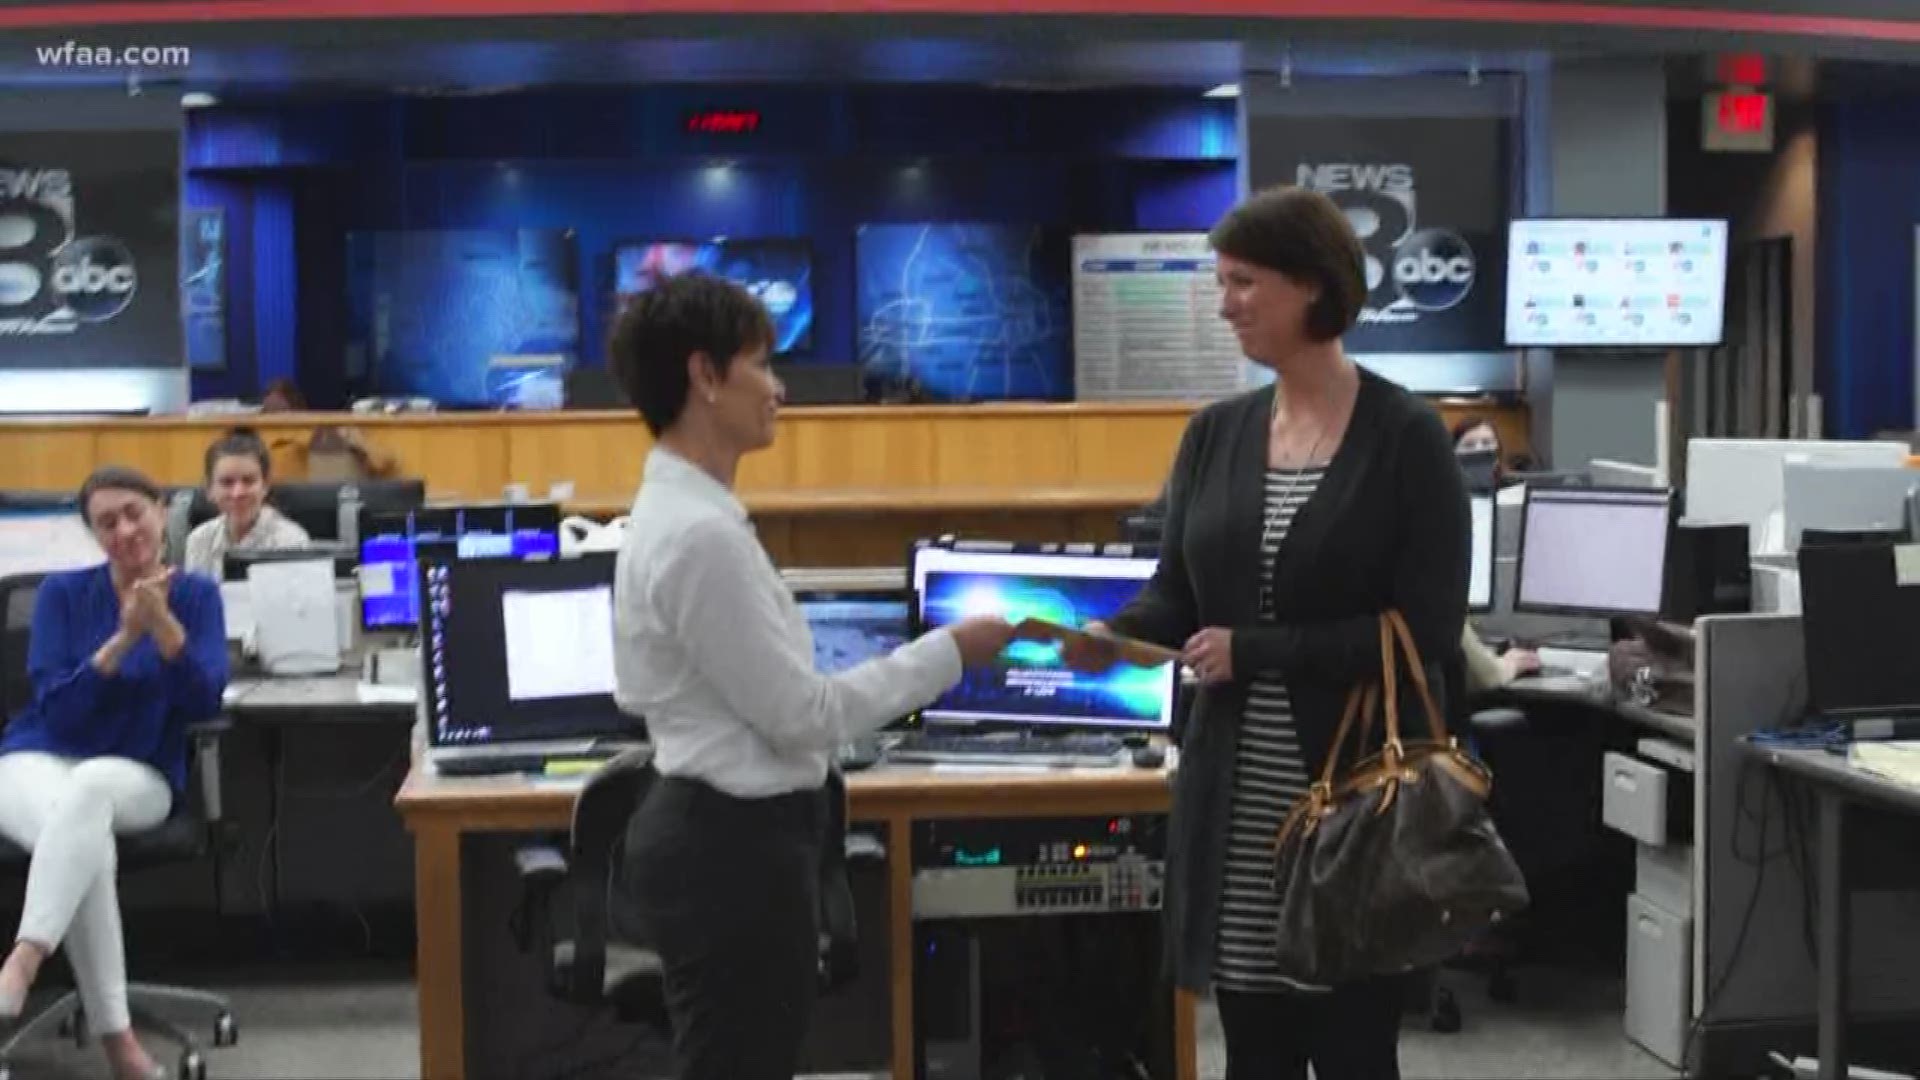 A few days ago, WFAA did something television stations don't often do - make a financial contribution to a cause that it reported on.The station invited Jennifer in to the newsroom to make the announcement internally."WFAA and TEGNA - our parent compan